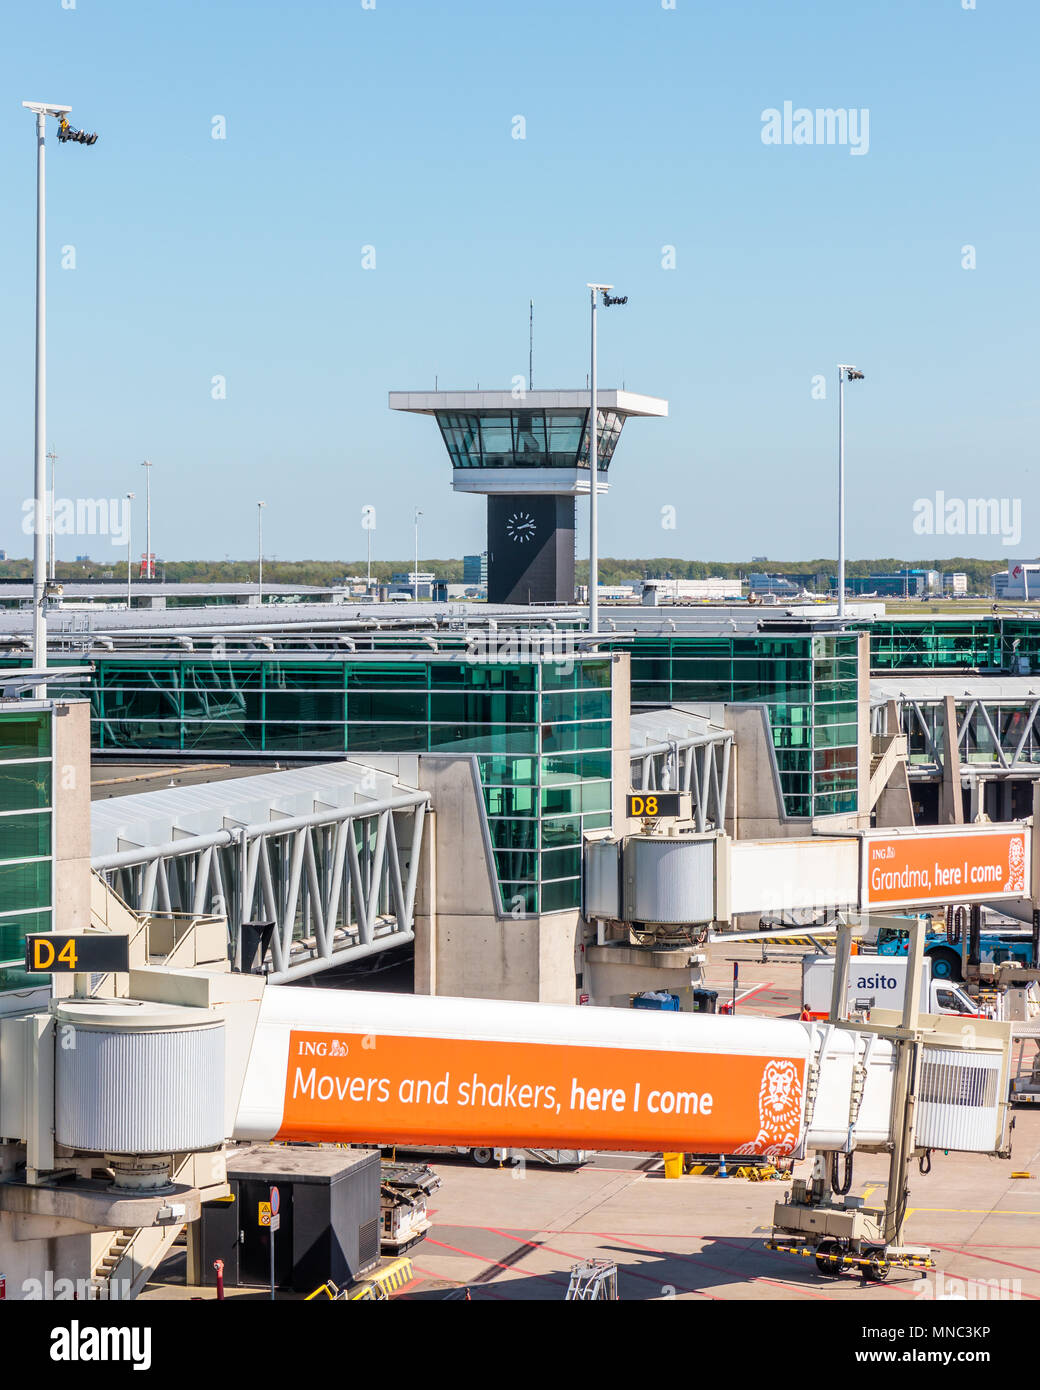 Amsterdam, Netherlands - May 04, 2018: The Air Traffic control Tower at Schiphol Airport Stock Photo